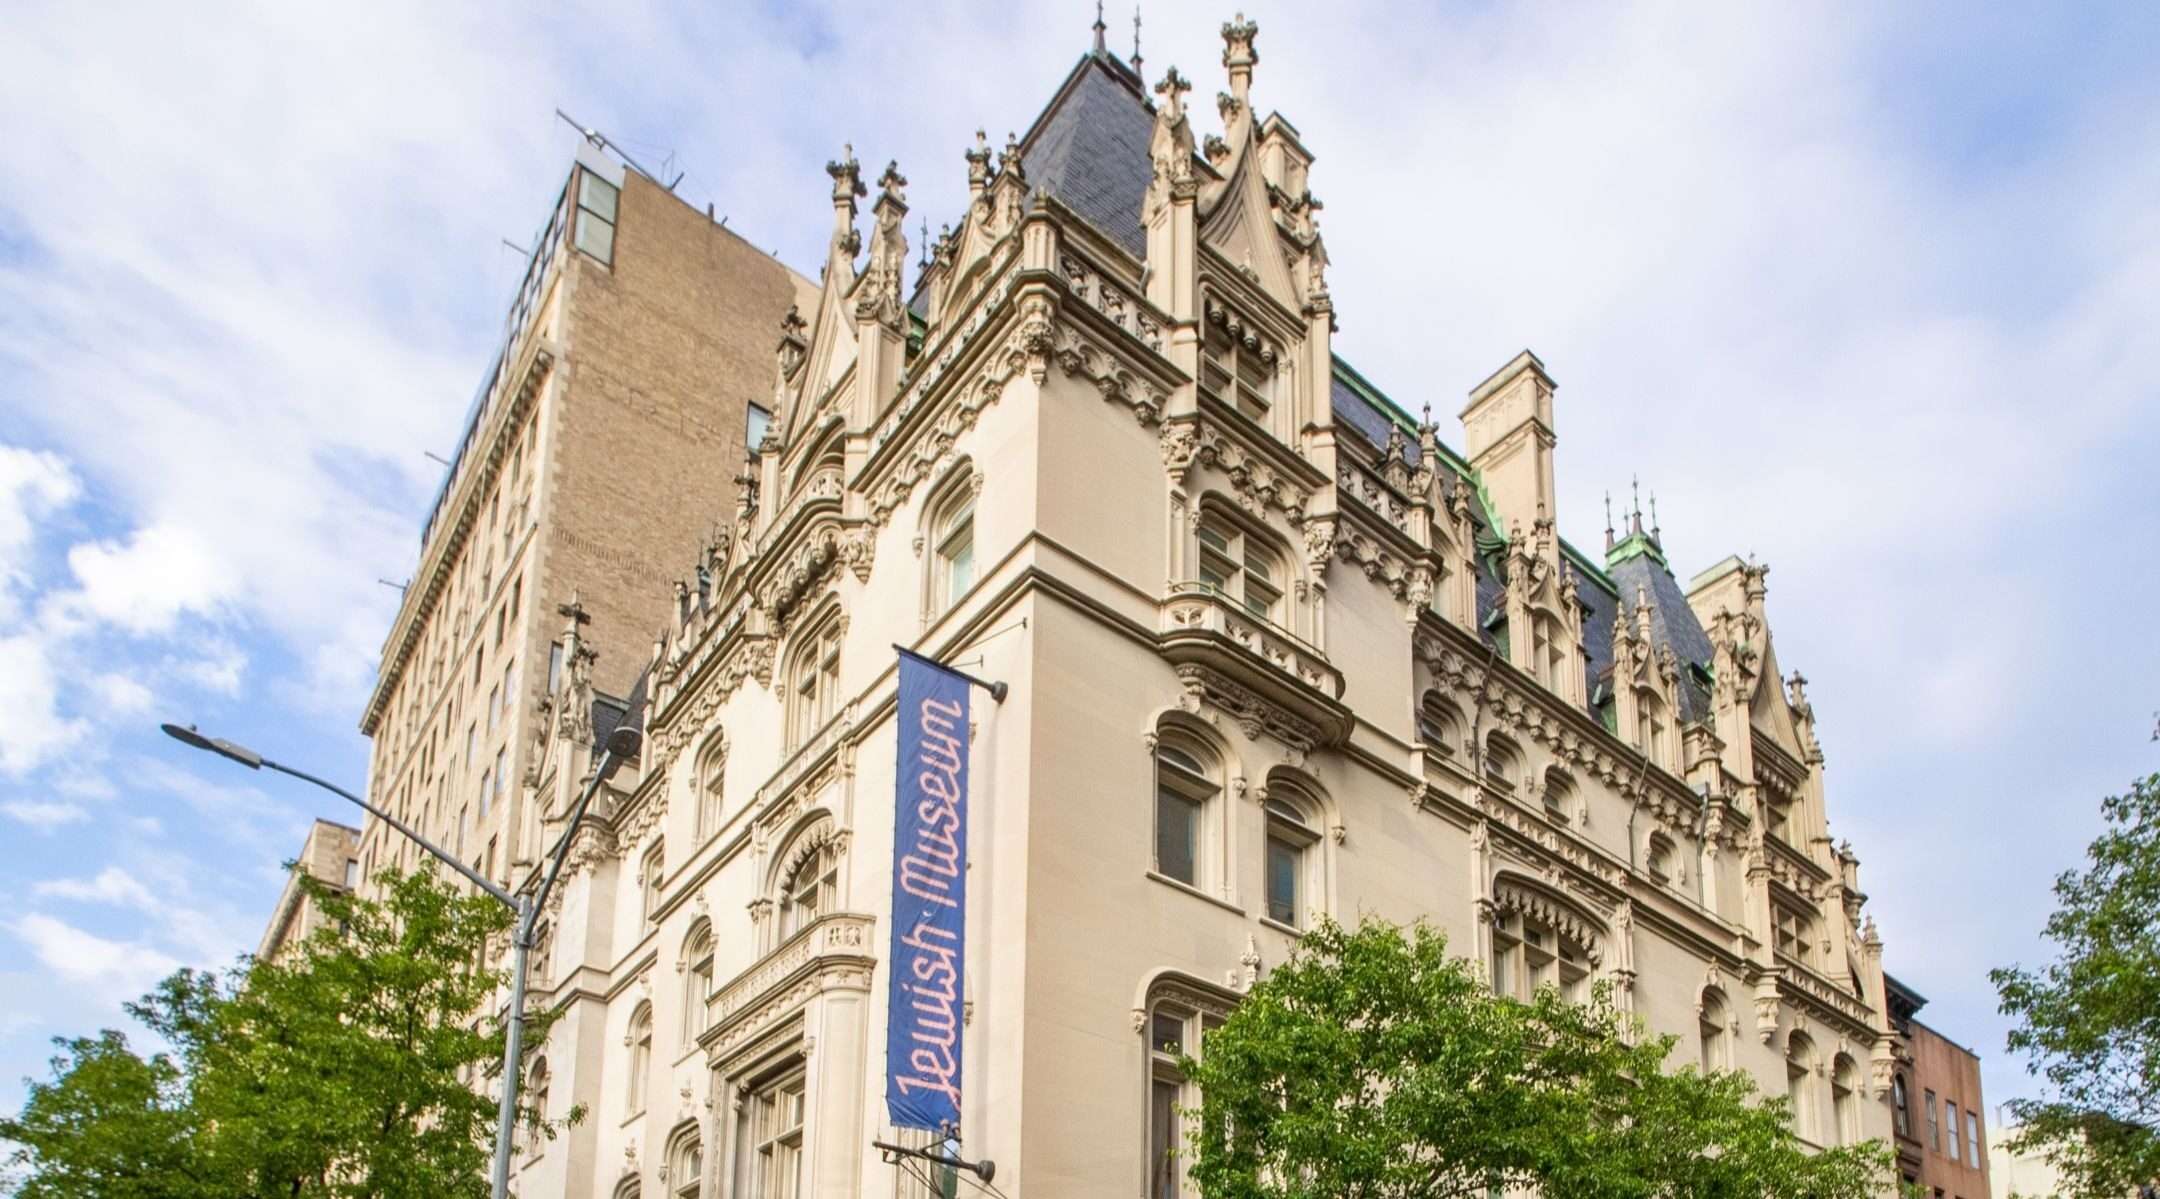 NYCs Jewish Museum to reopen following 6